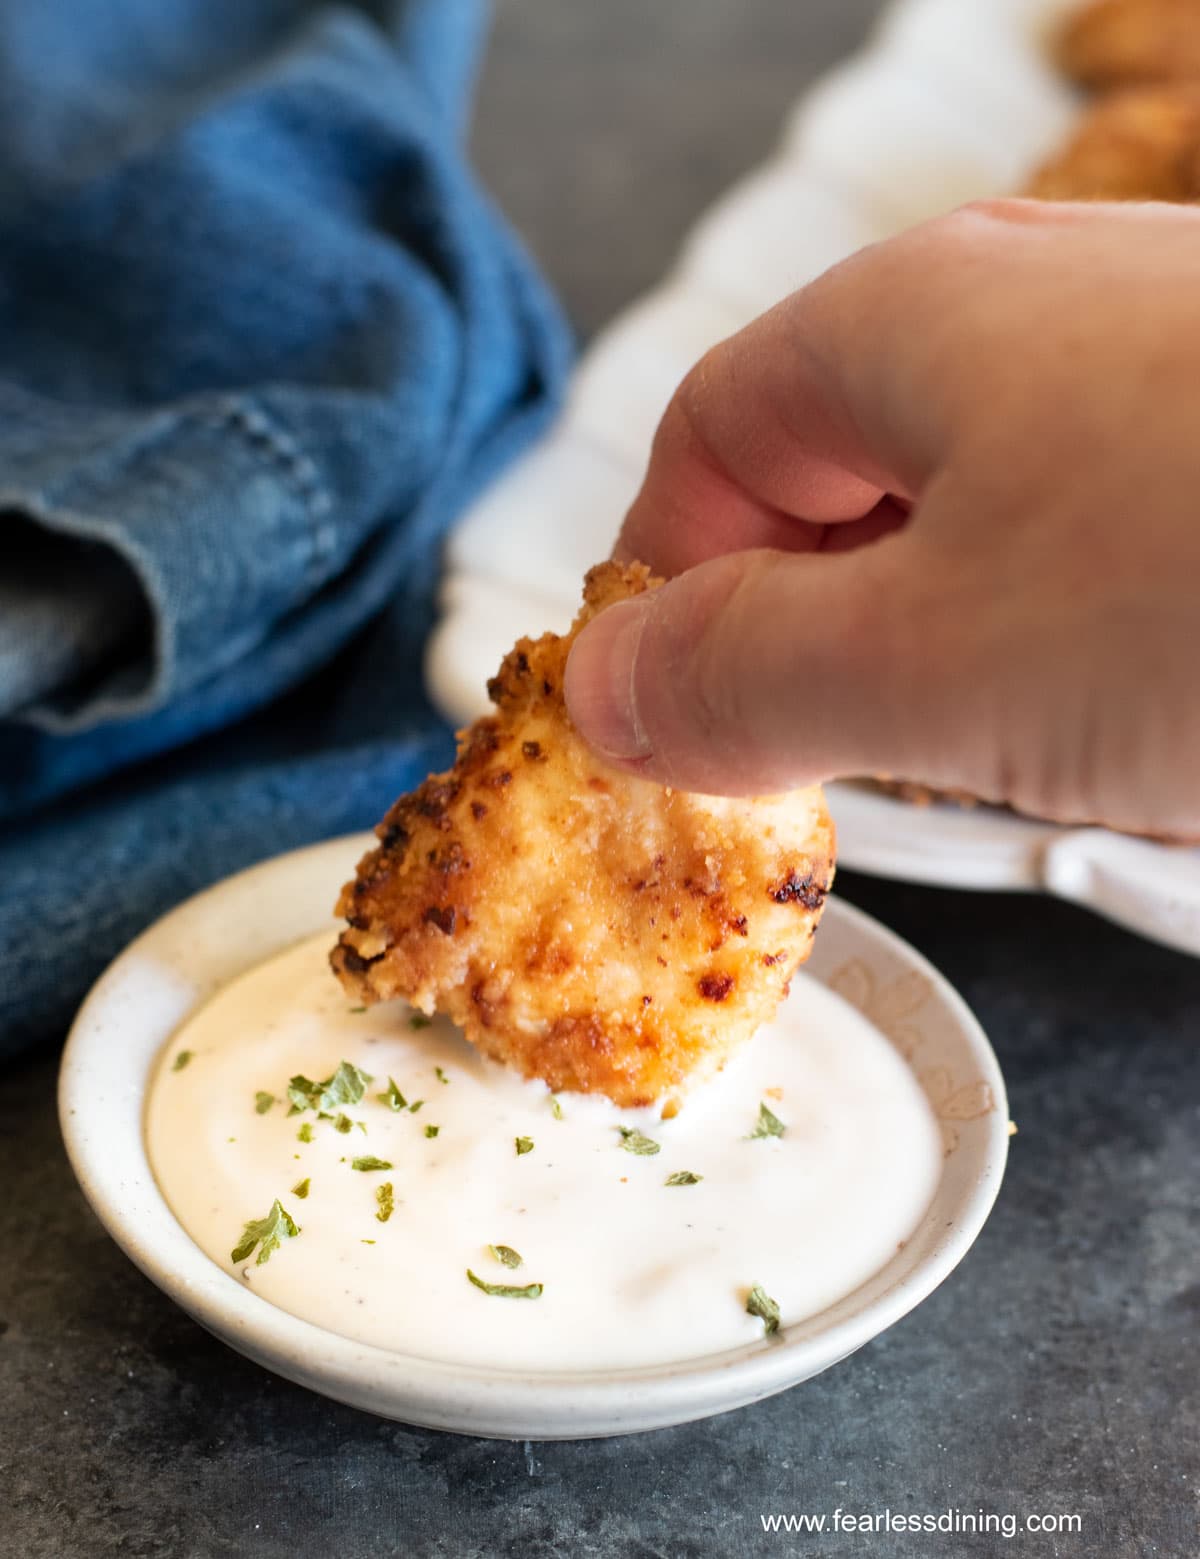 Dipping the gluten free nugget in ranch dressing.